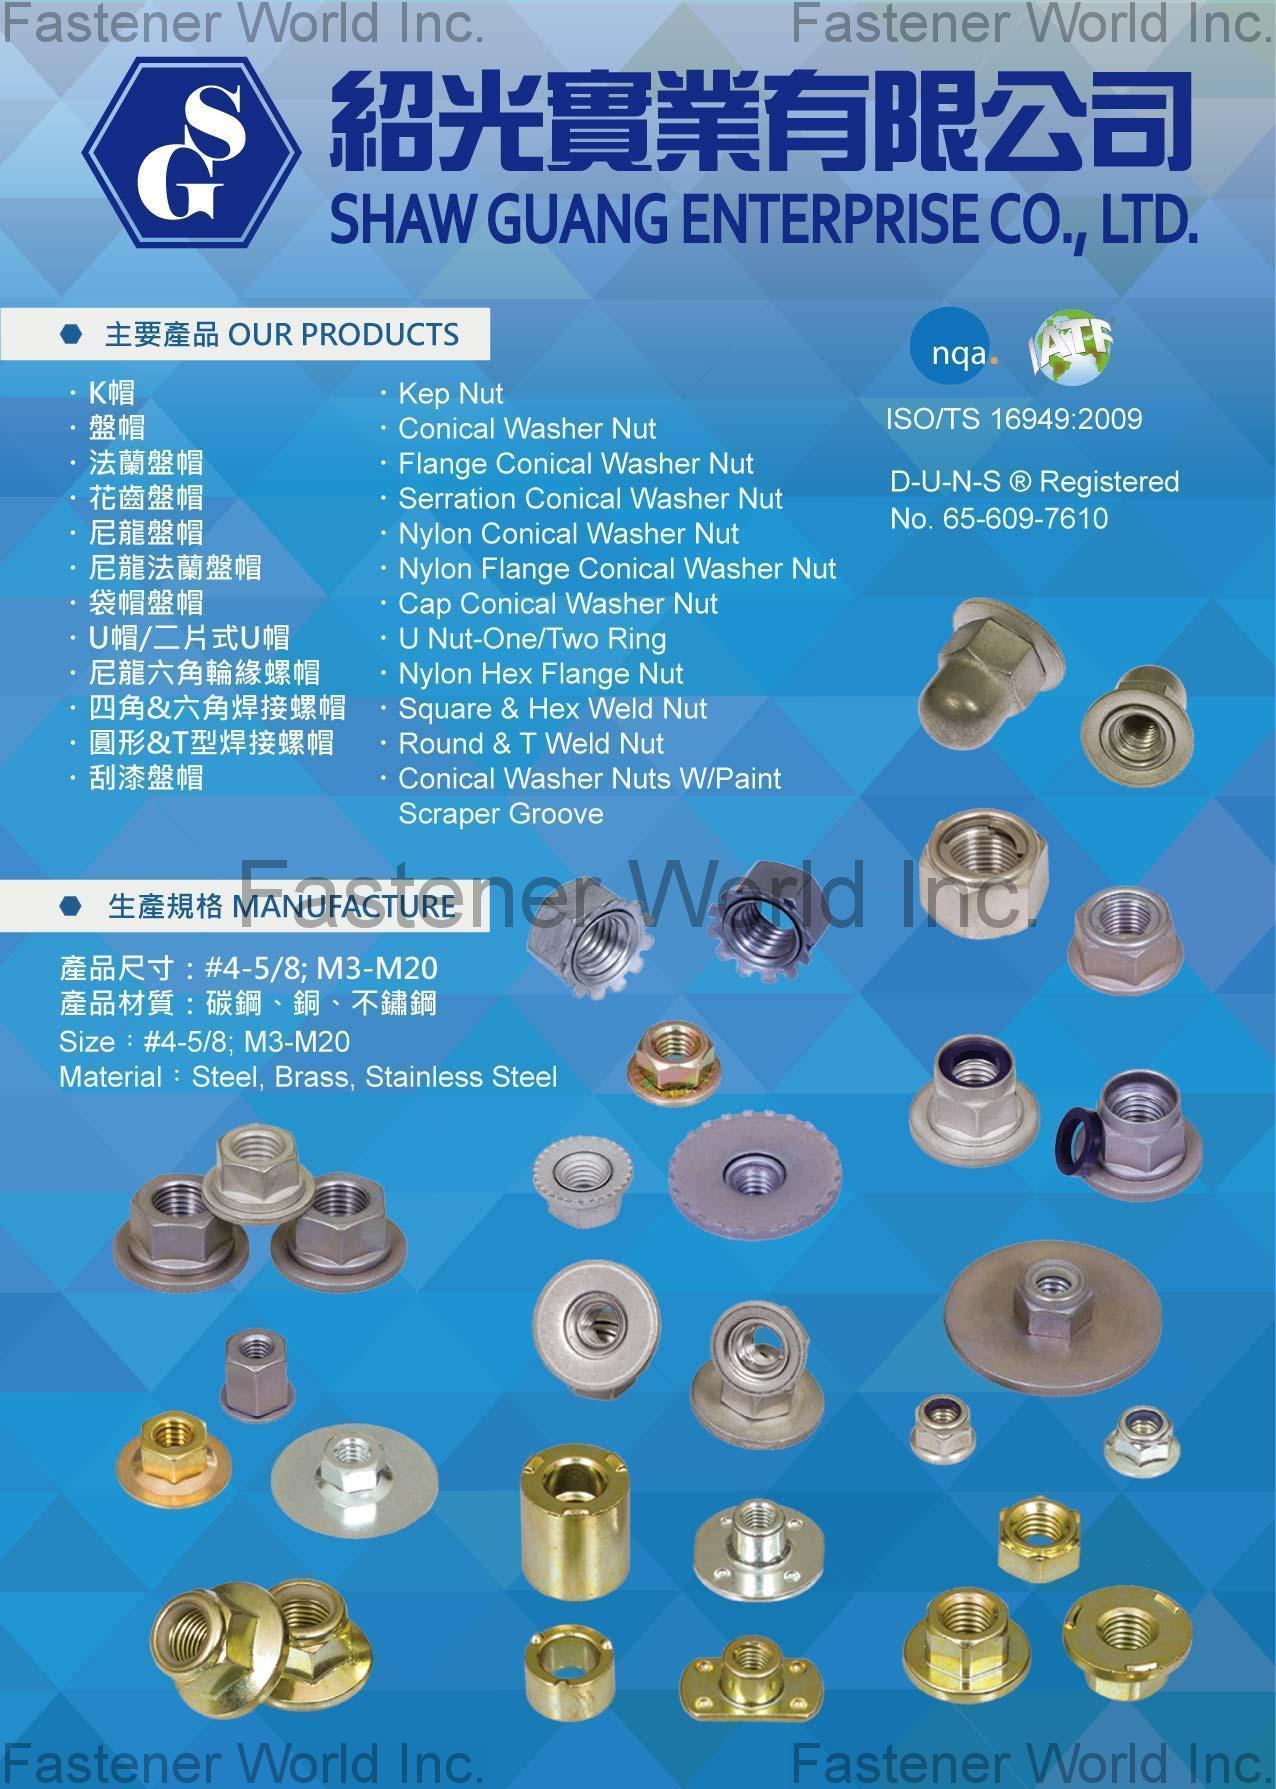 SHAW GUANG ENTERPRISE CO., LTD. , Kep Nut, Conical Washer Nut, Flange Conical Washer Nut, Serration Conical Washer Nut, Nylon Conical Washer Nut, Nylon Flange Conical Washer Nut, Cap Conical Washer Nut, Conical Washer Nuts W/Paint Scraper Groove, U Nut-One/Two Ring, Nylon Hex Flange Nut, Square & Hex Weld Nut, Round & T Weld Nut , All Kinds Of Nuts